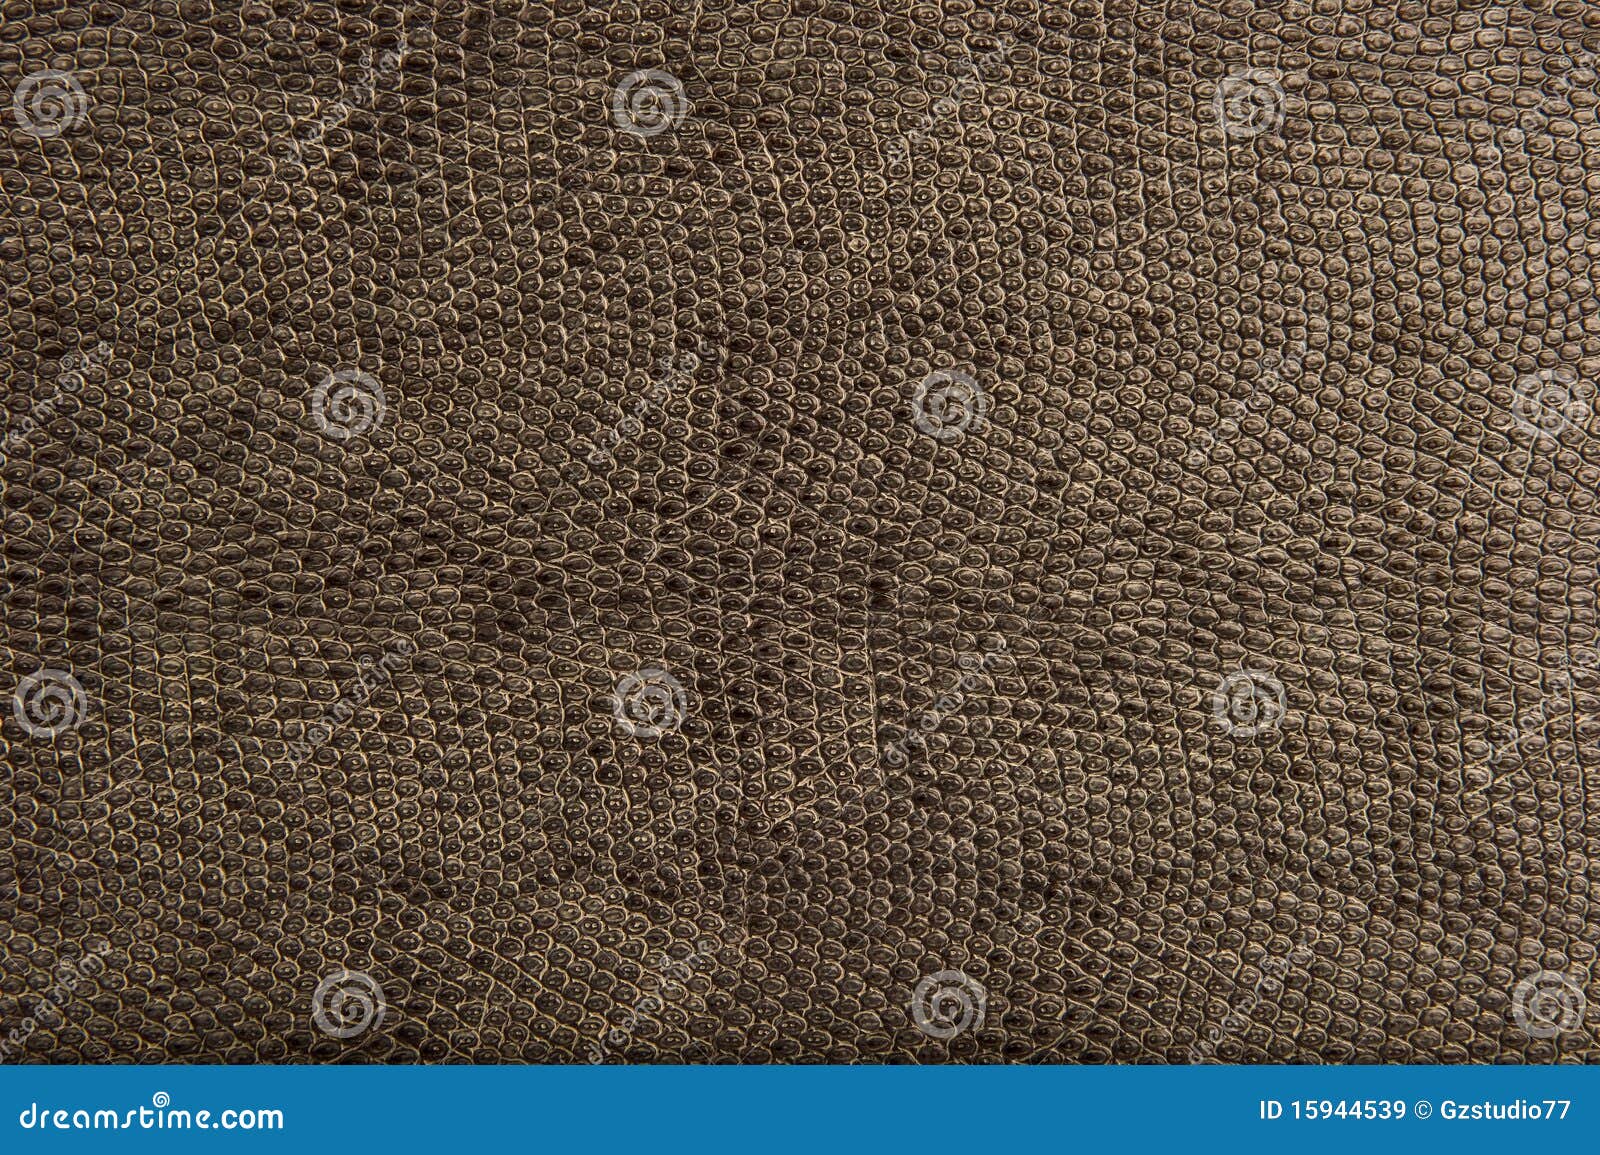 high quality animal reptile skin patten and textur